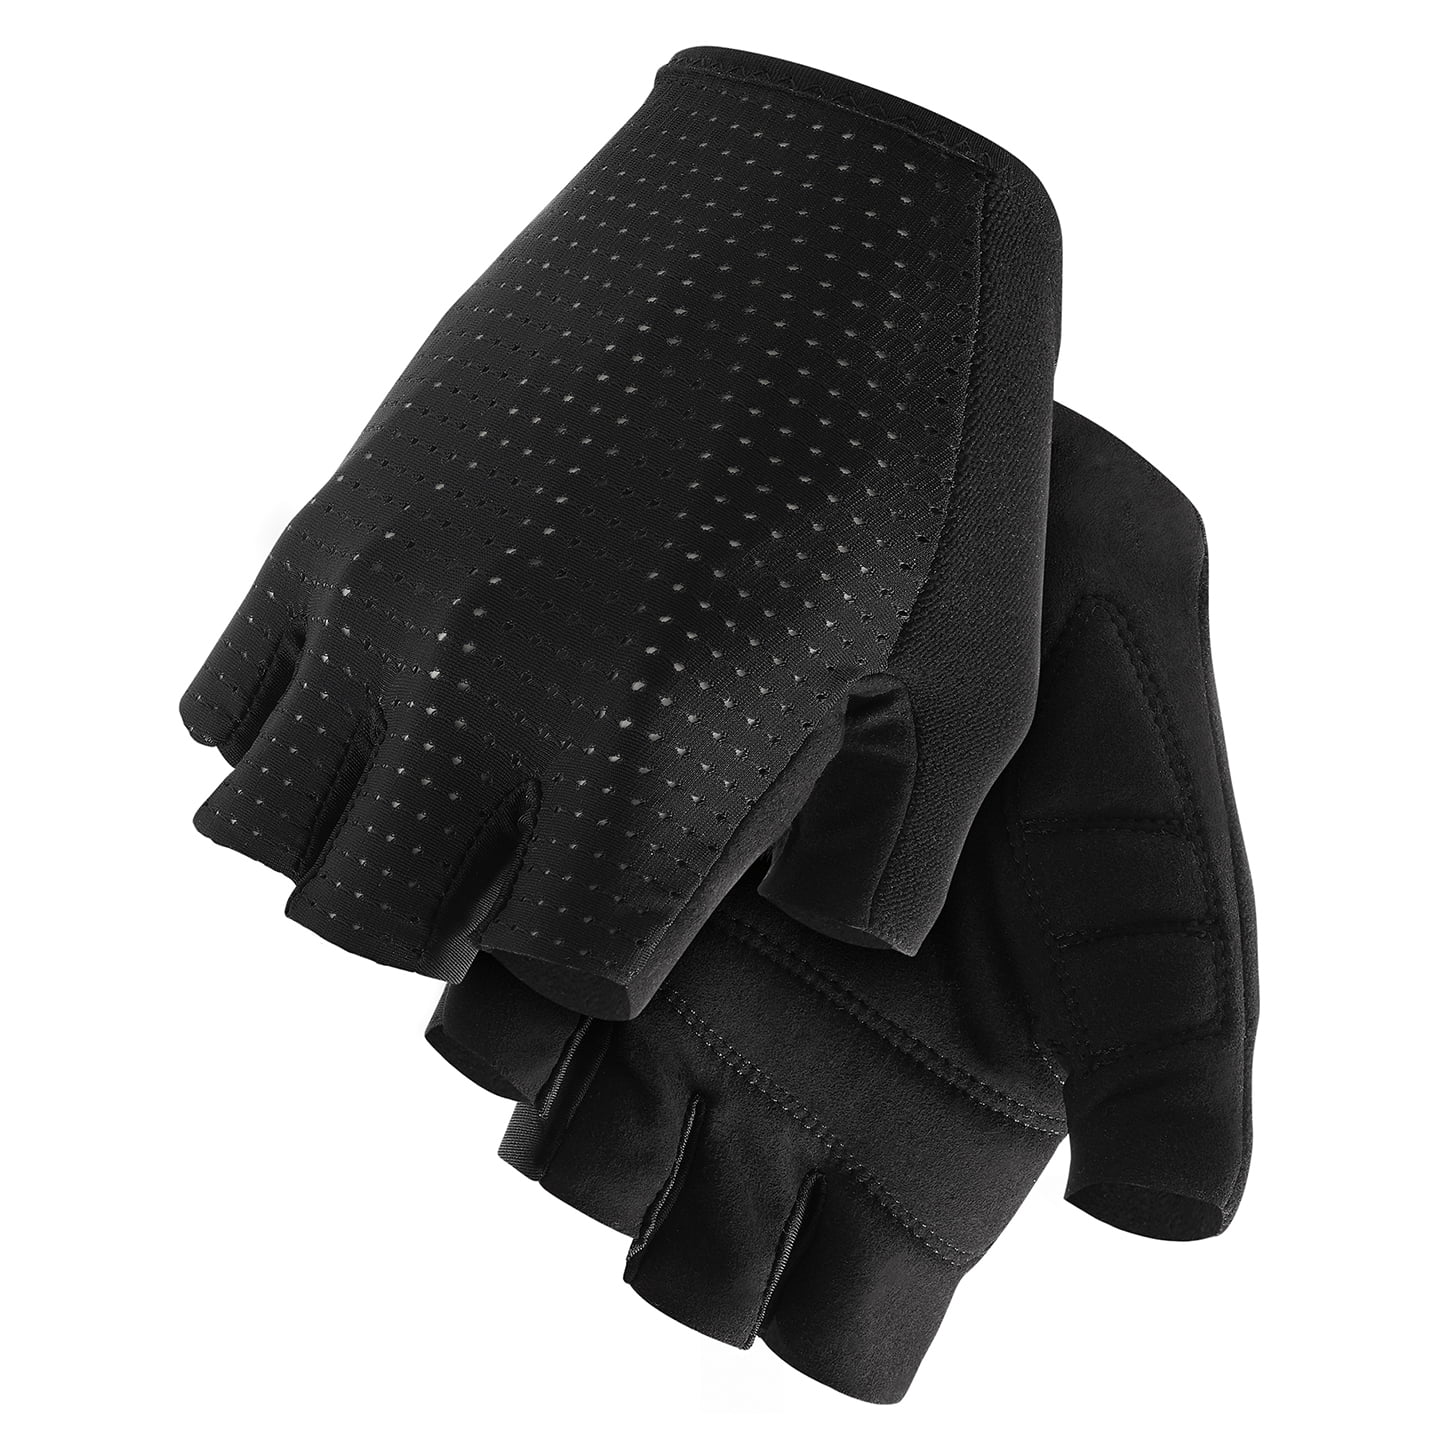 GT C2 Gloves, for men, size XL, Cycling gloves, Cycle gear